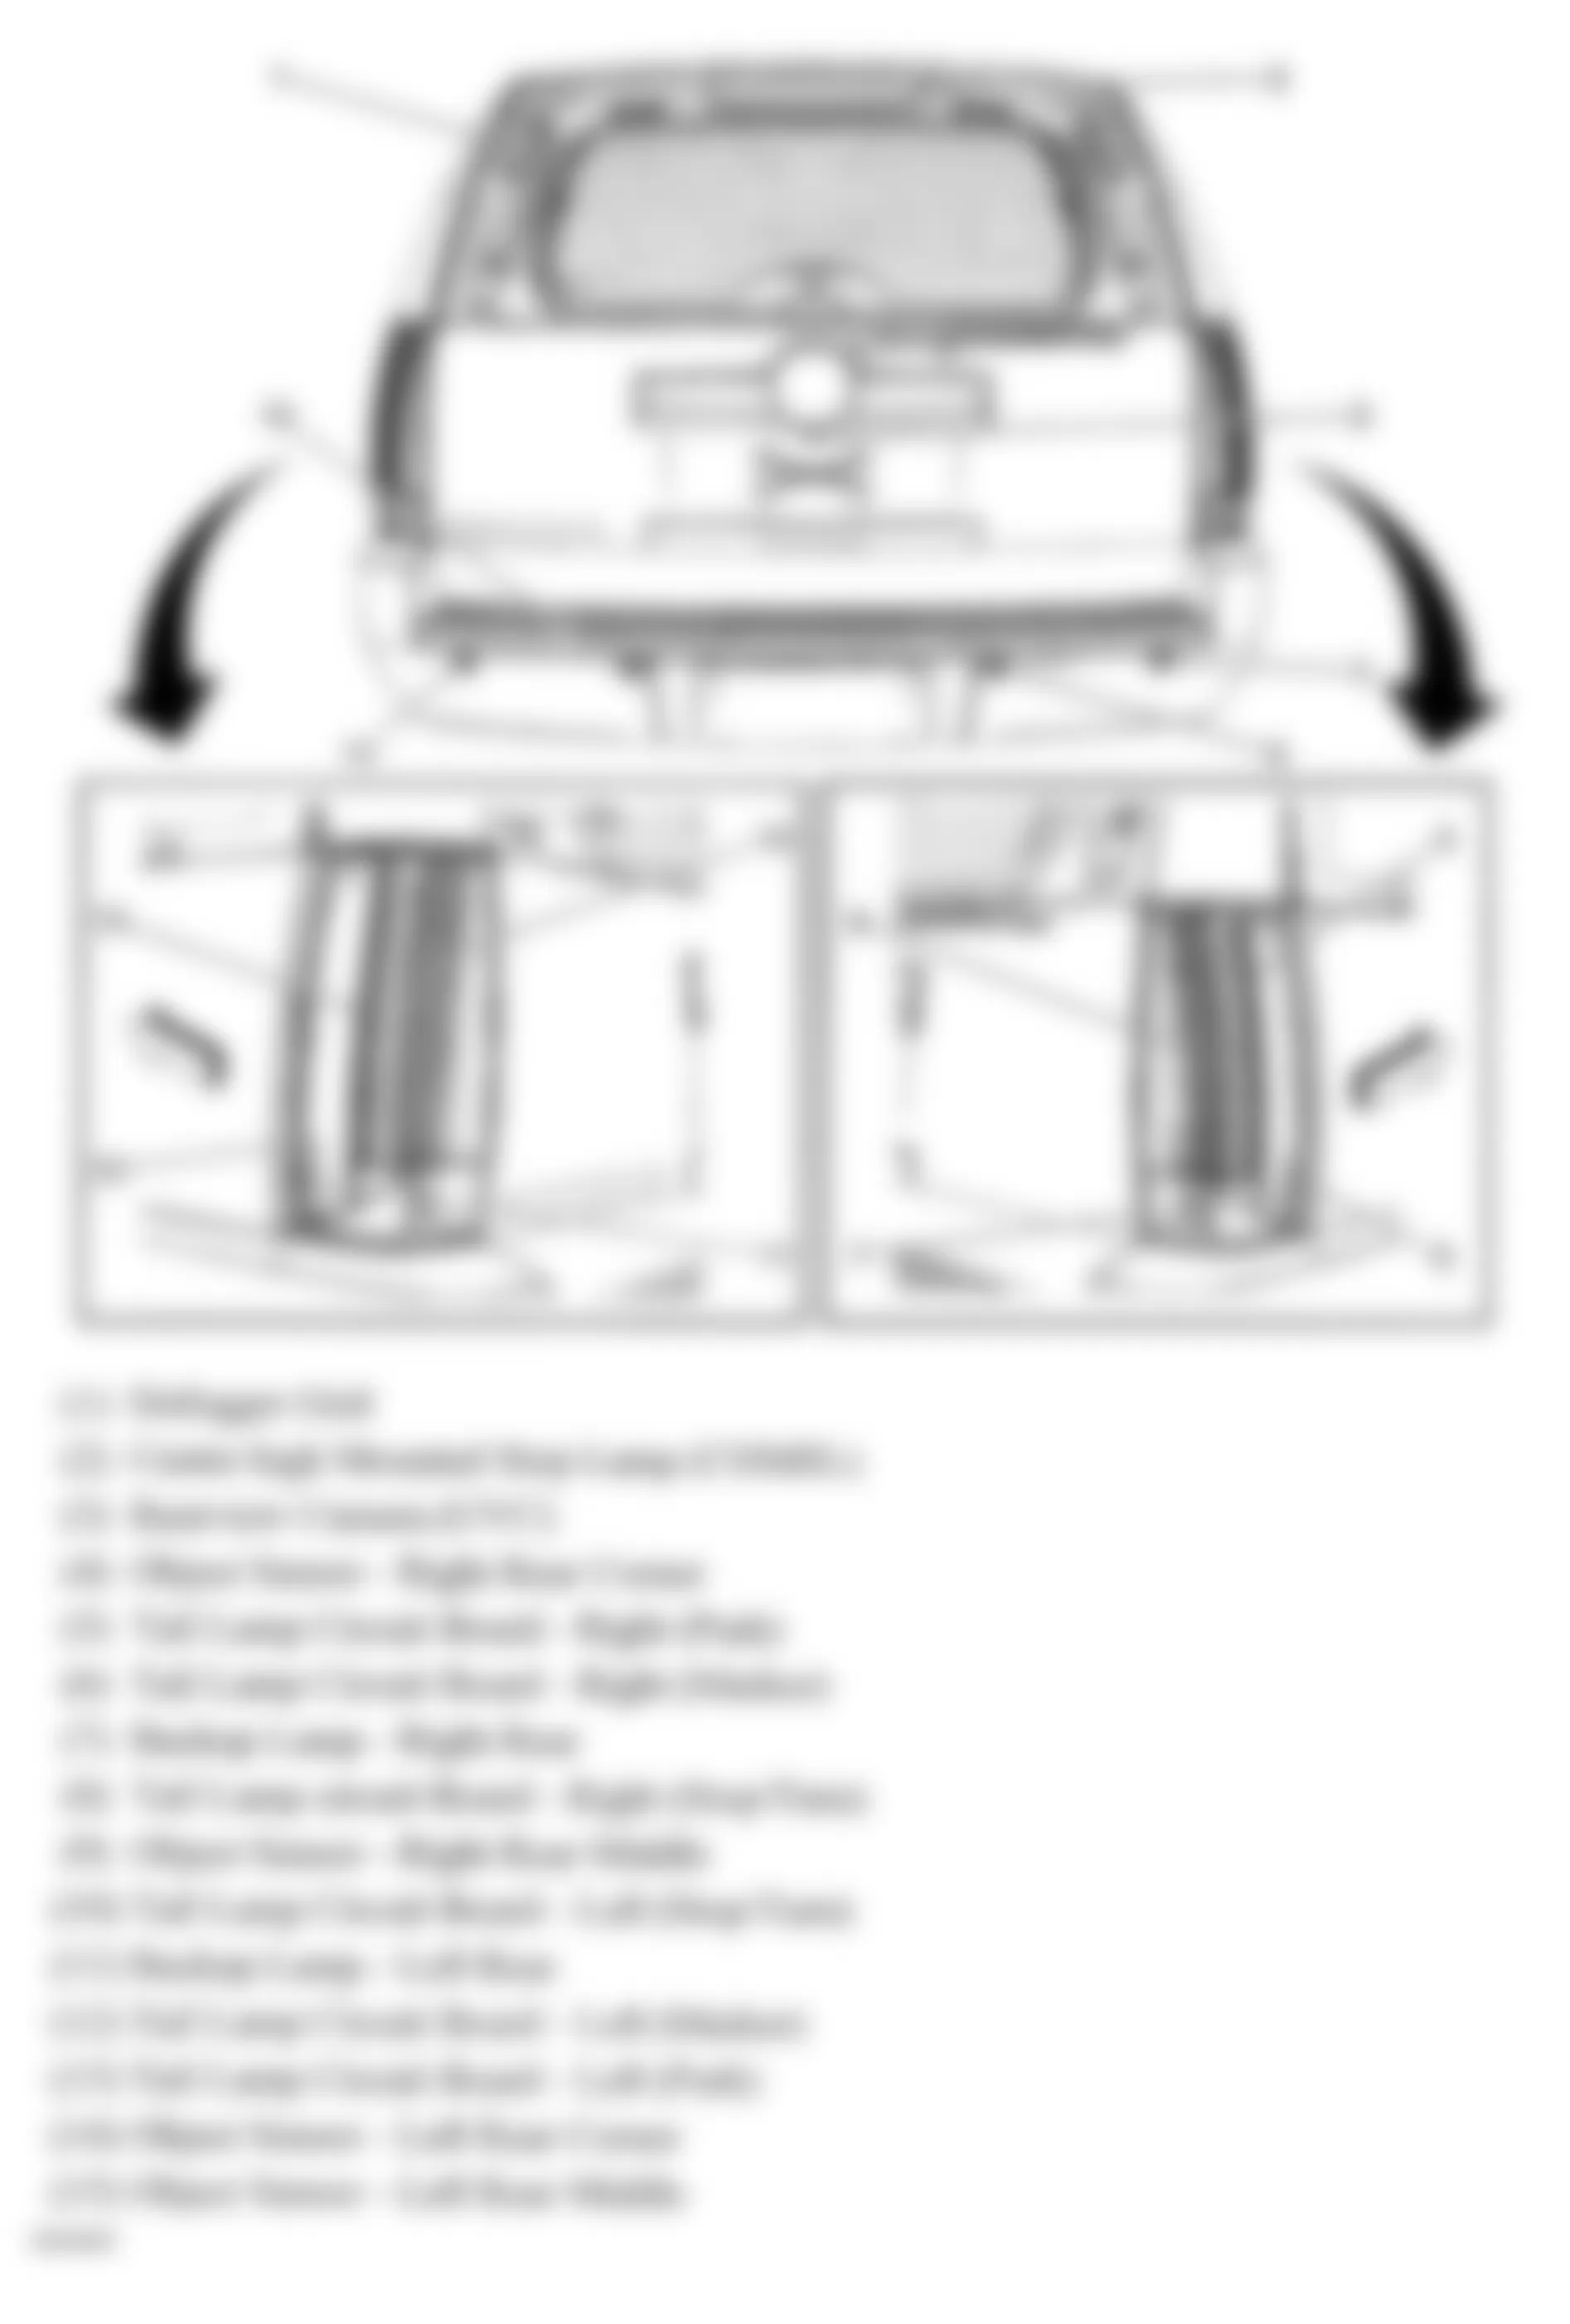 GMC Yukon XL K1500 2008 - Component Locations -  Rear Of Vehicle (Tahoe & Escalade W/One Piece Liftgate)